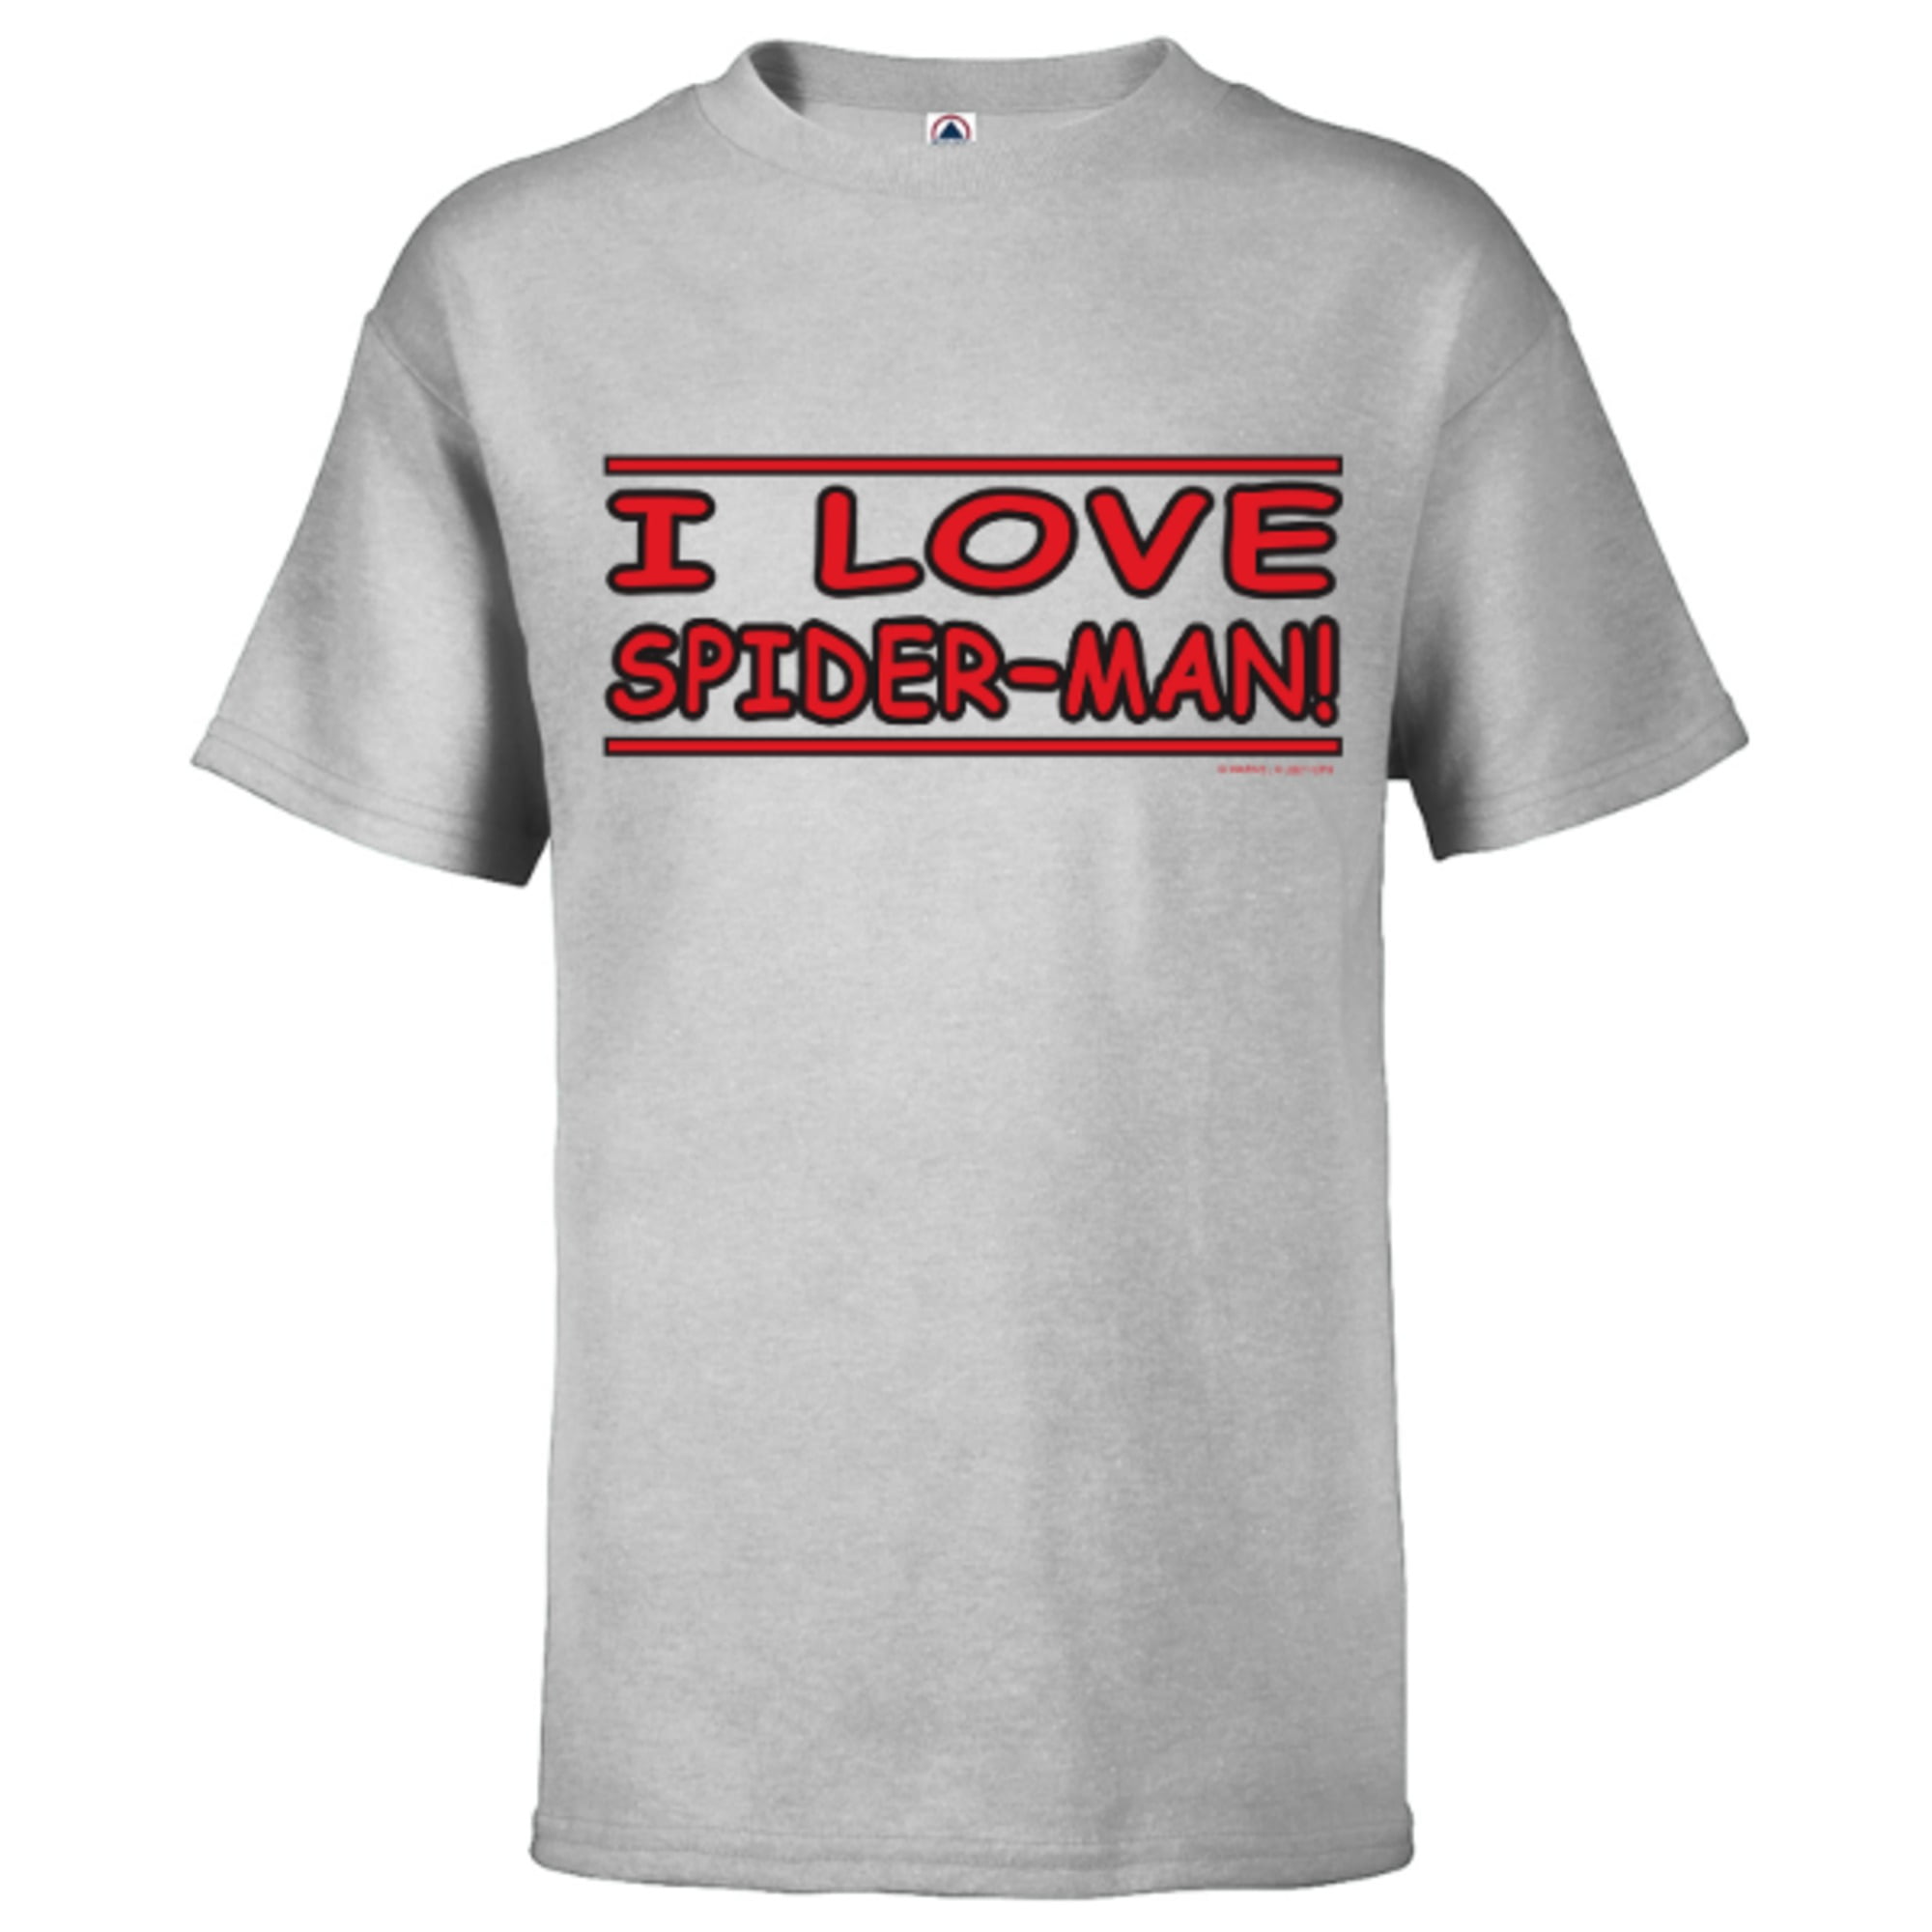 T-Shirt I No Customized-Royal for – Kids Sleeve Marvel Way Spider-Man Spider-Man: Love - Home Short